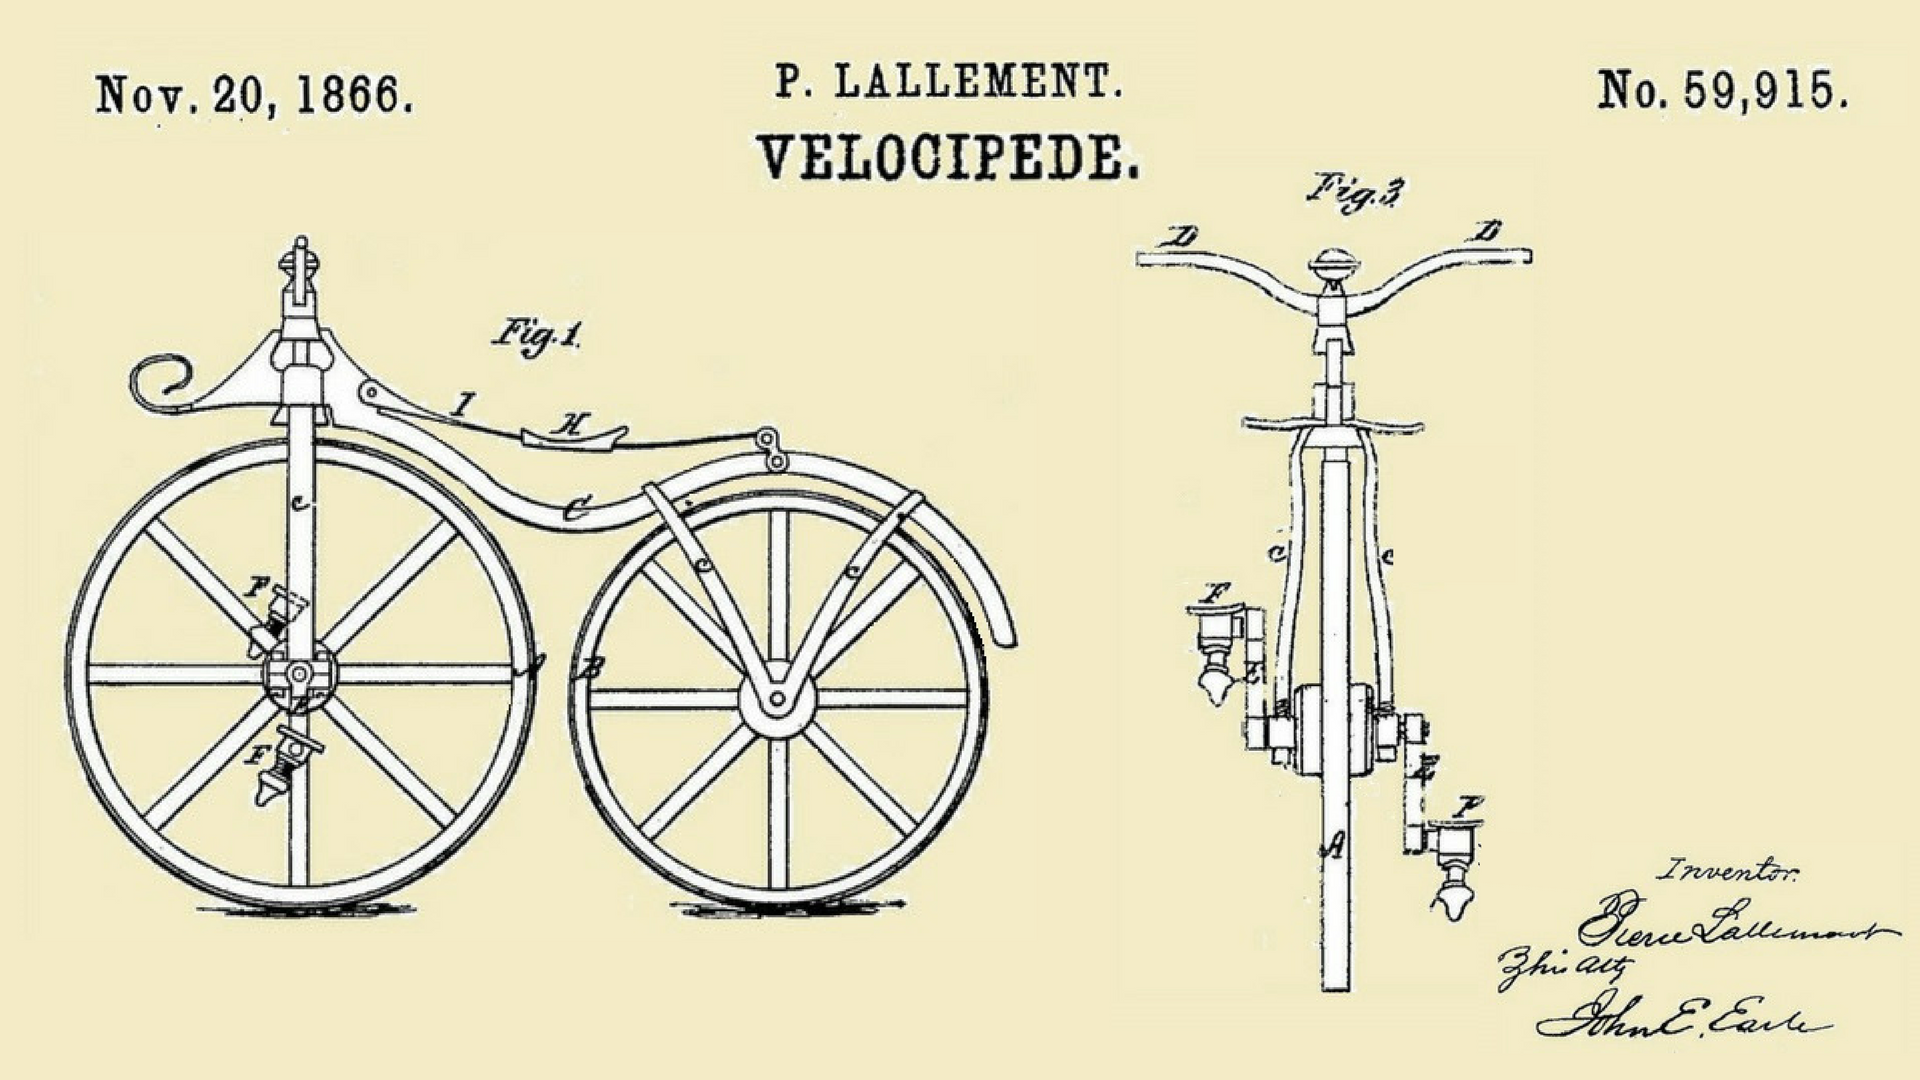 World Intellectual Property Organization (WIPO) on Twitter: "#TBT: How fast would today's @LeTour competitors be able to finish on this classic " velocipede" patented in 1866? #TDF2017 https://t.co/SdL5Cw6C5b" / Twitter